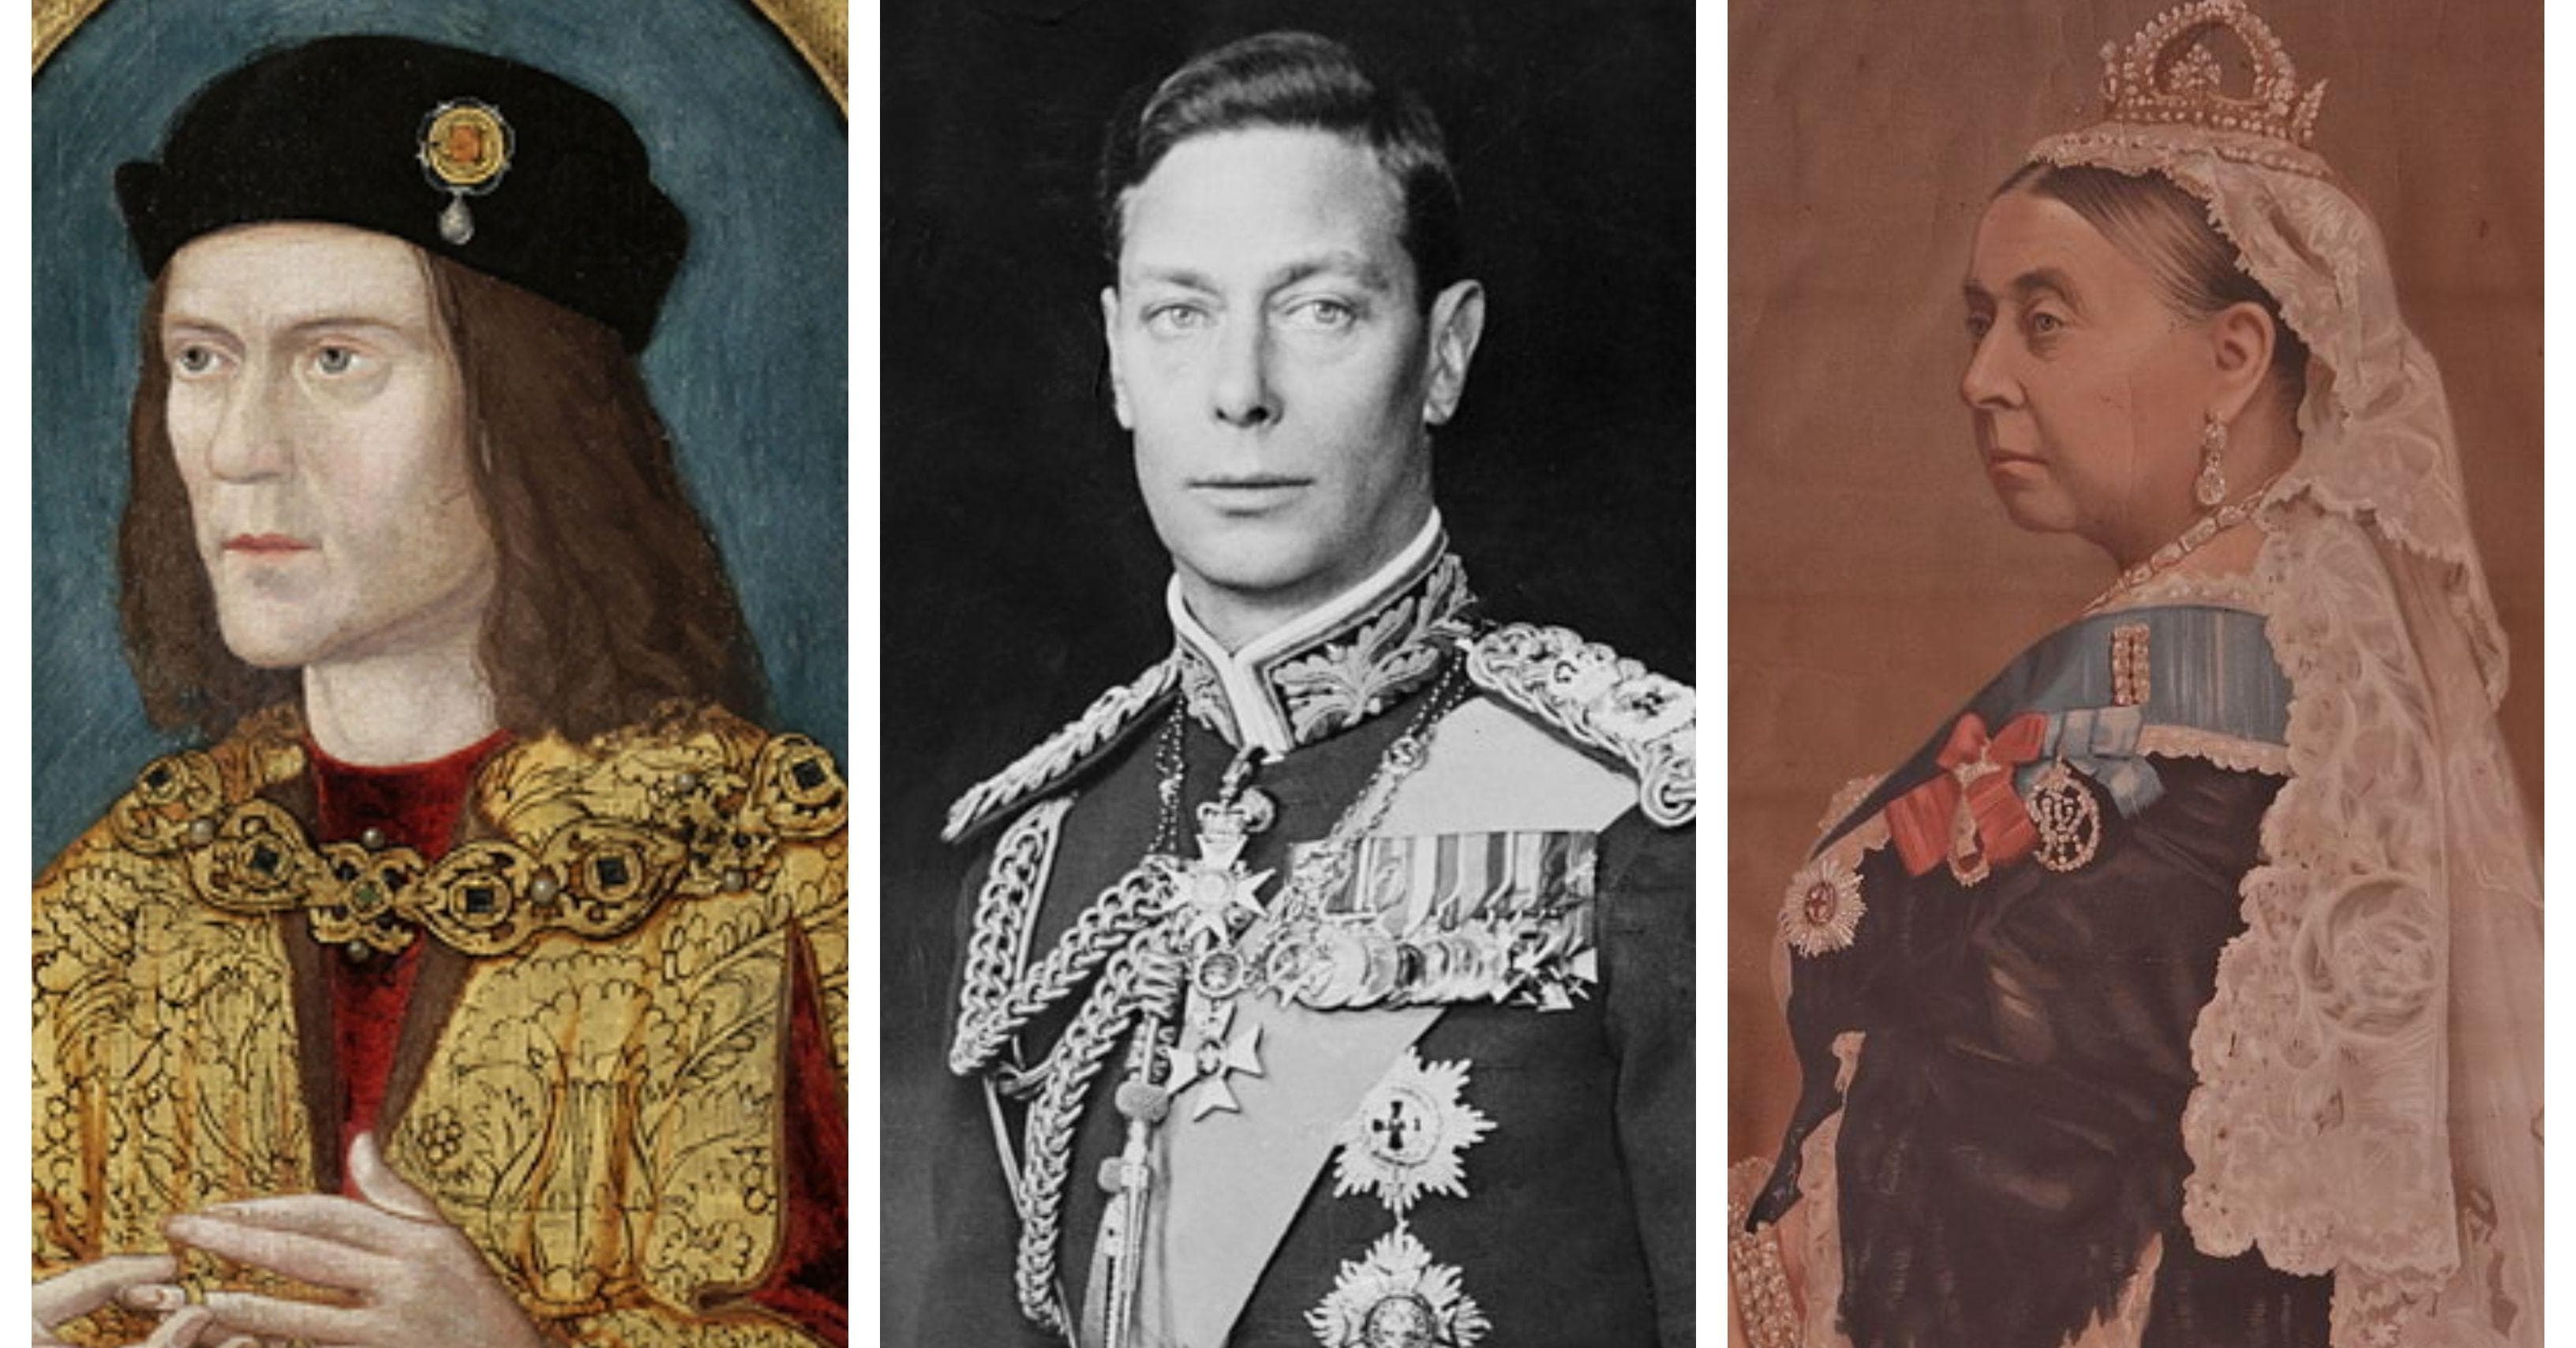 Facts About British Royalty We Just Learned That Made Us Say 'Really?'